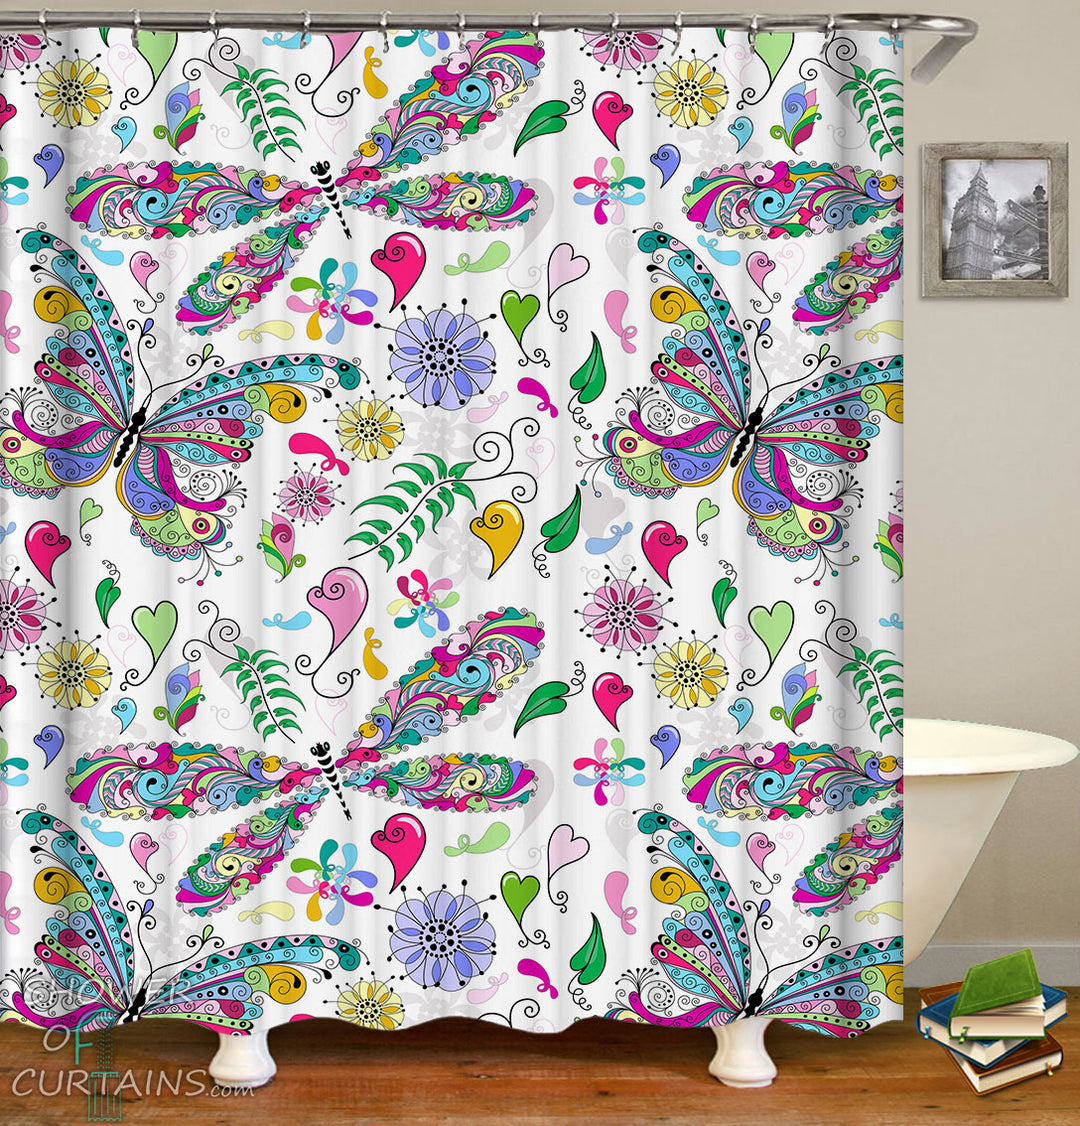 Shower Curtains of Colorful Butterflies And Dragonflies